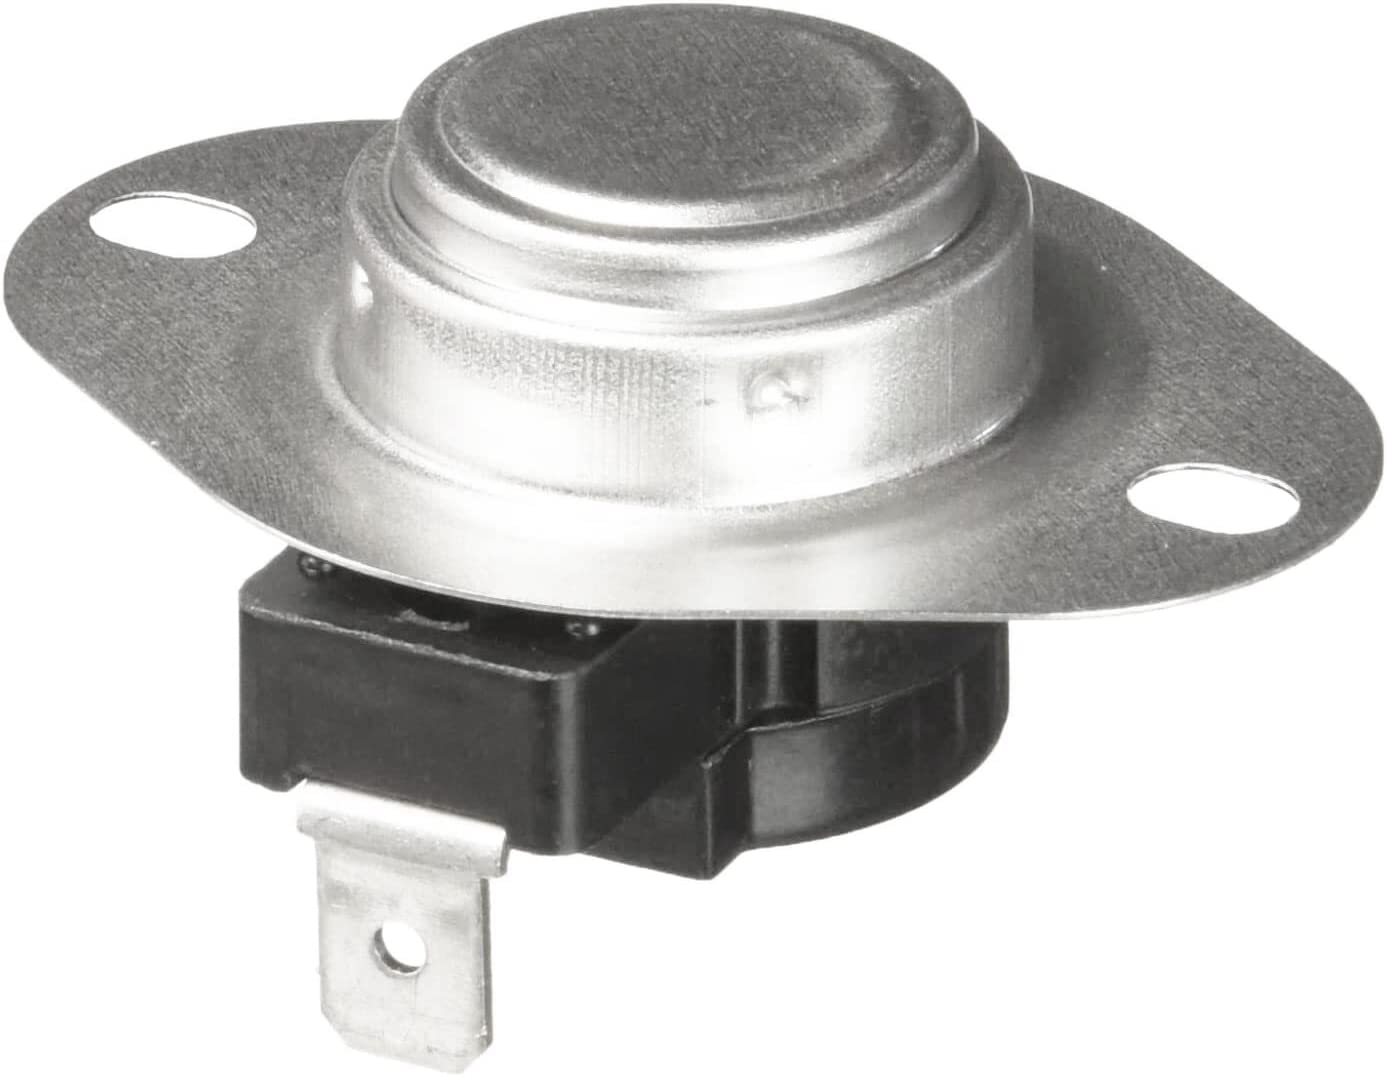 6931EL3001E High Limit Thermostat for LG Dryers